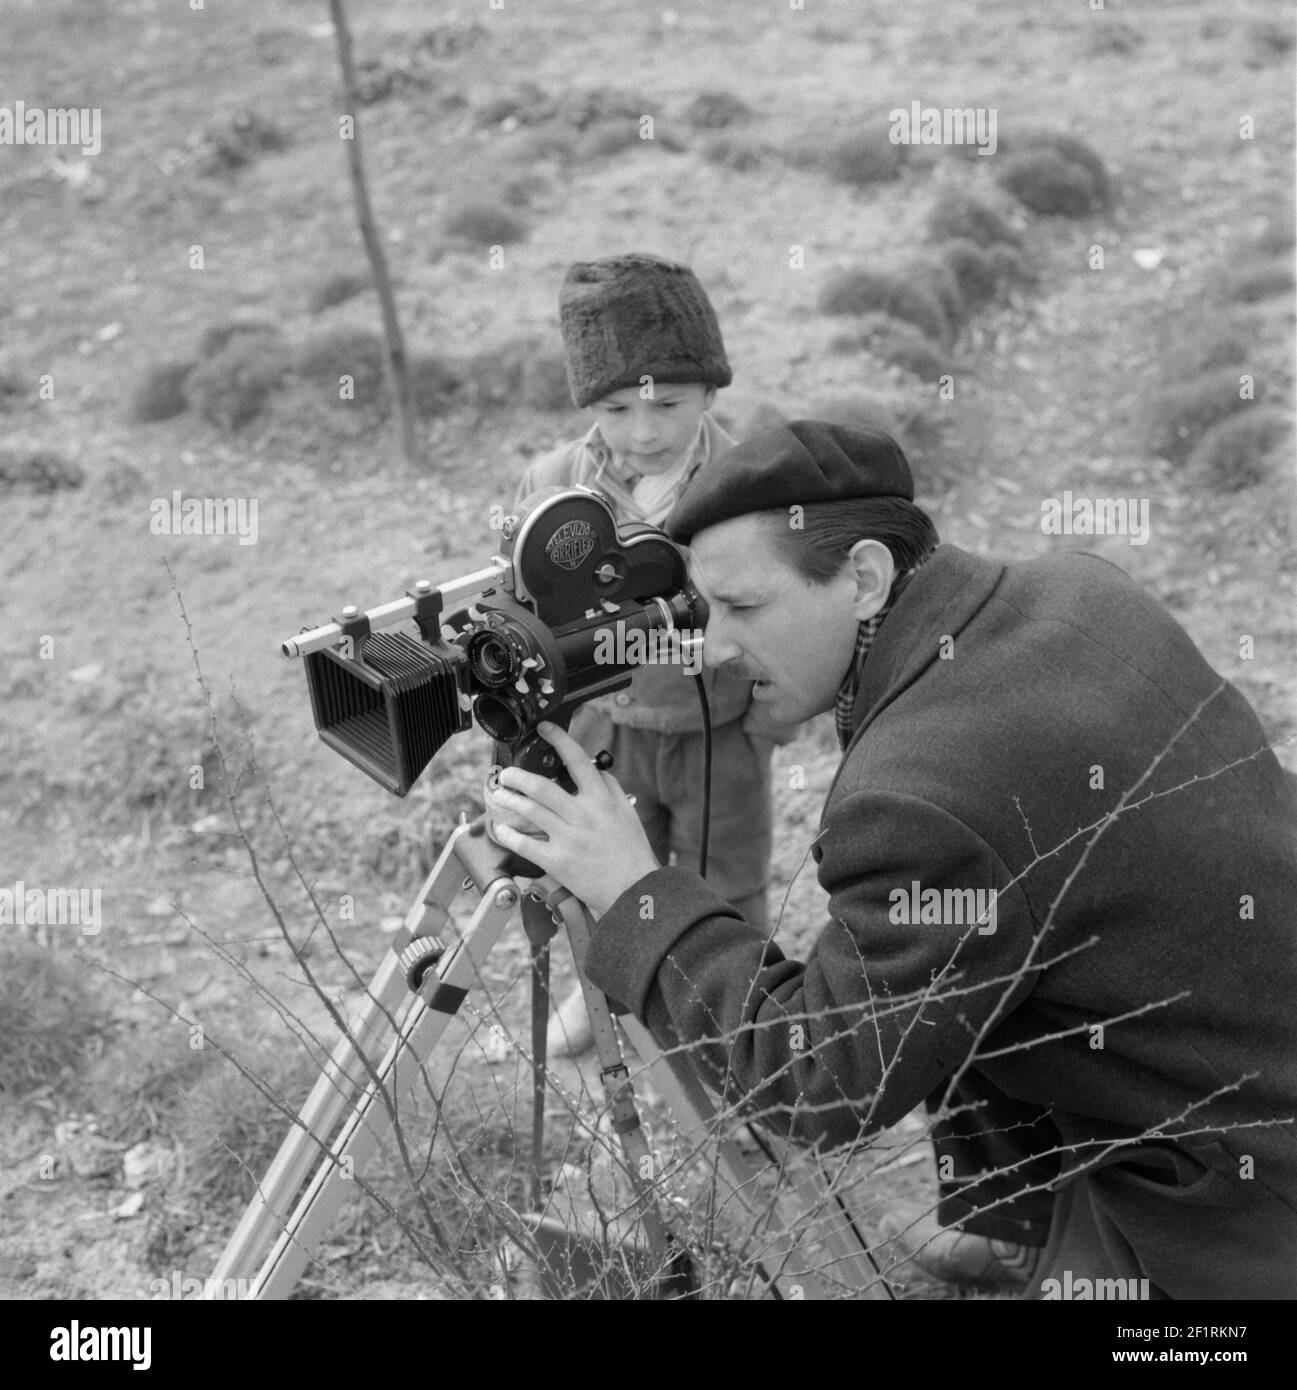 young boy watches man making movie filming with tripod mounted arriflex 16mm analogue film camera 1960s hungary Stock Photo